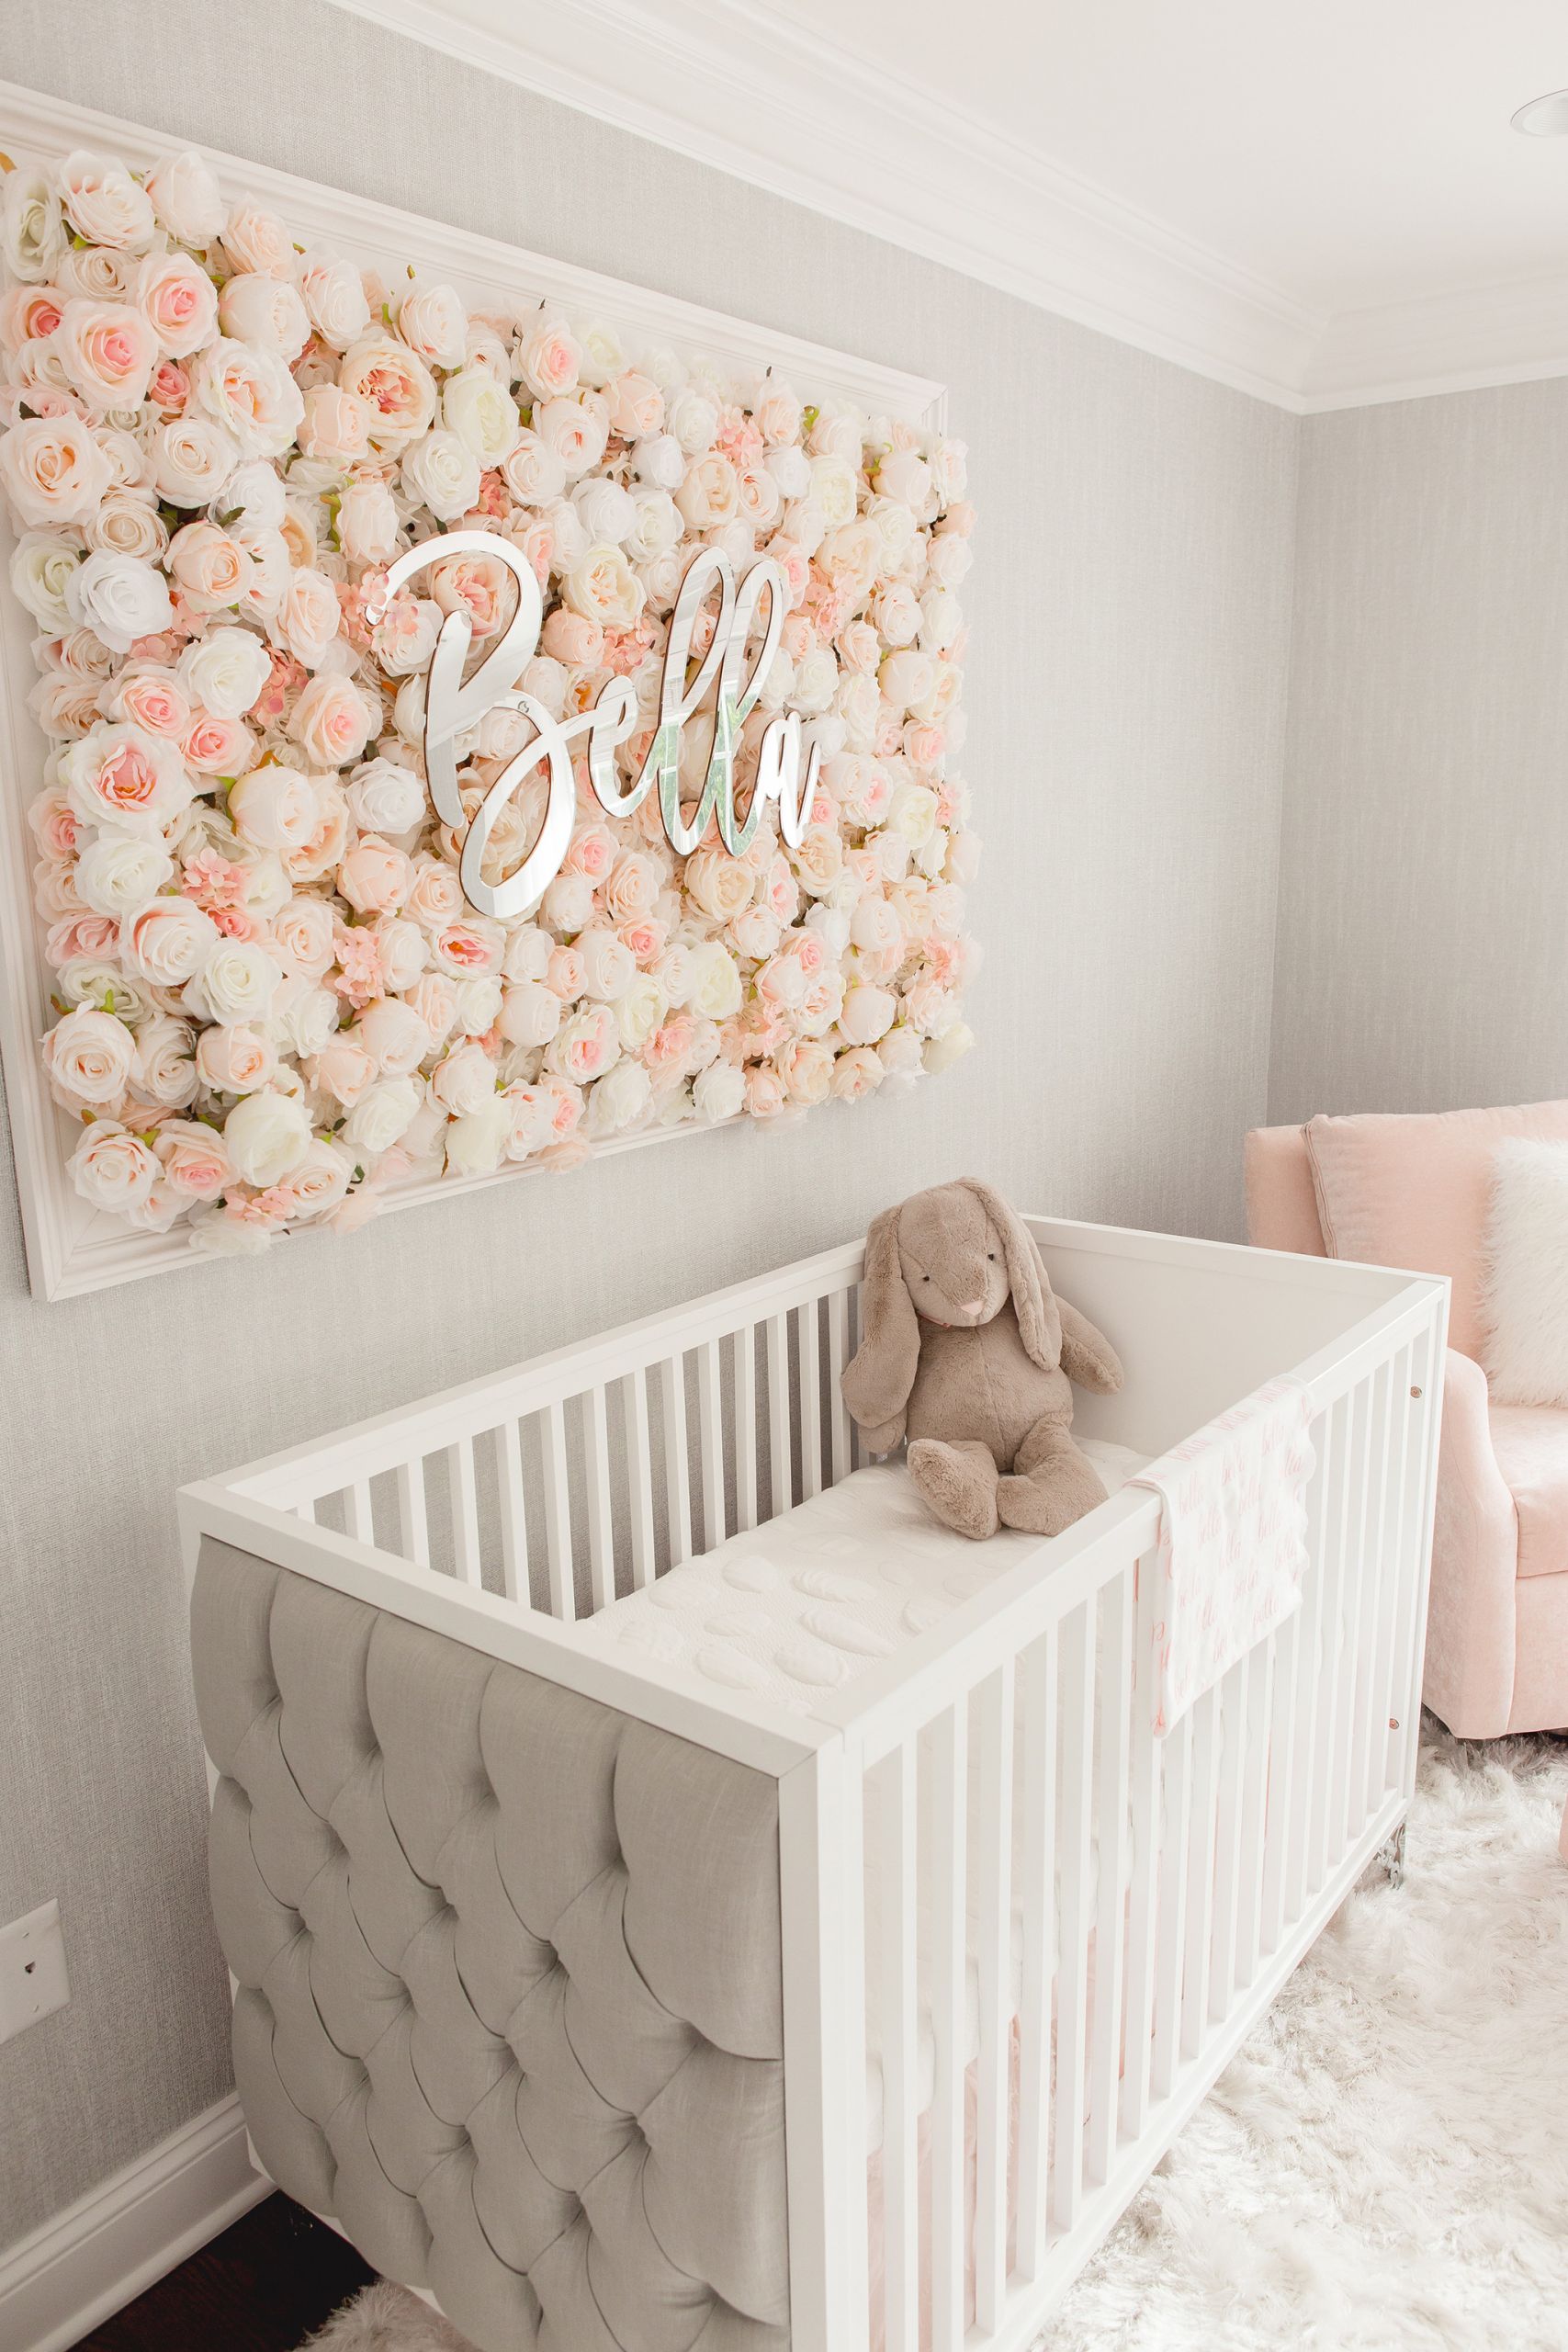 Baby Girl Nursery Wall Decor
 Guess Which Celebrity Nursery Inspired this Gorgeous Space